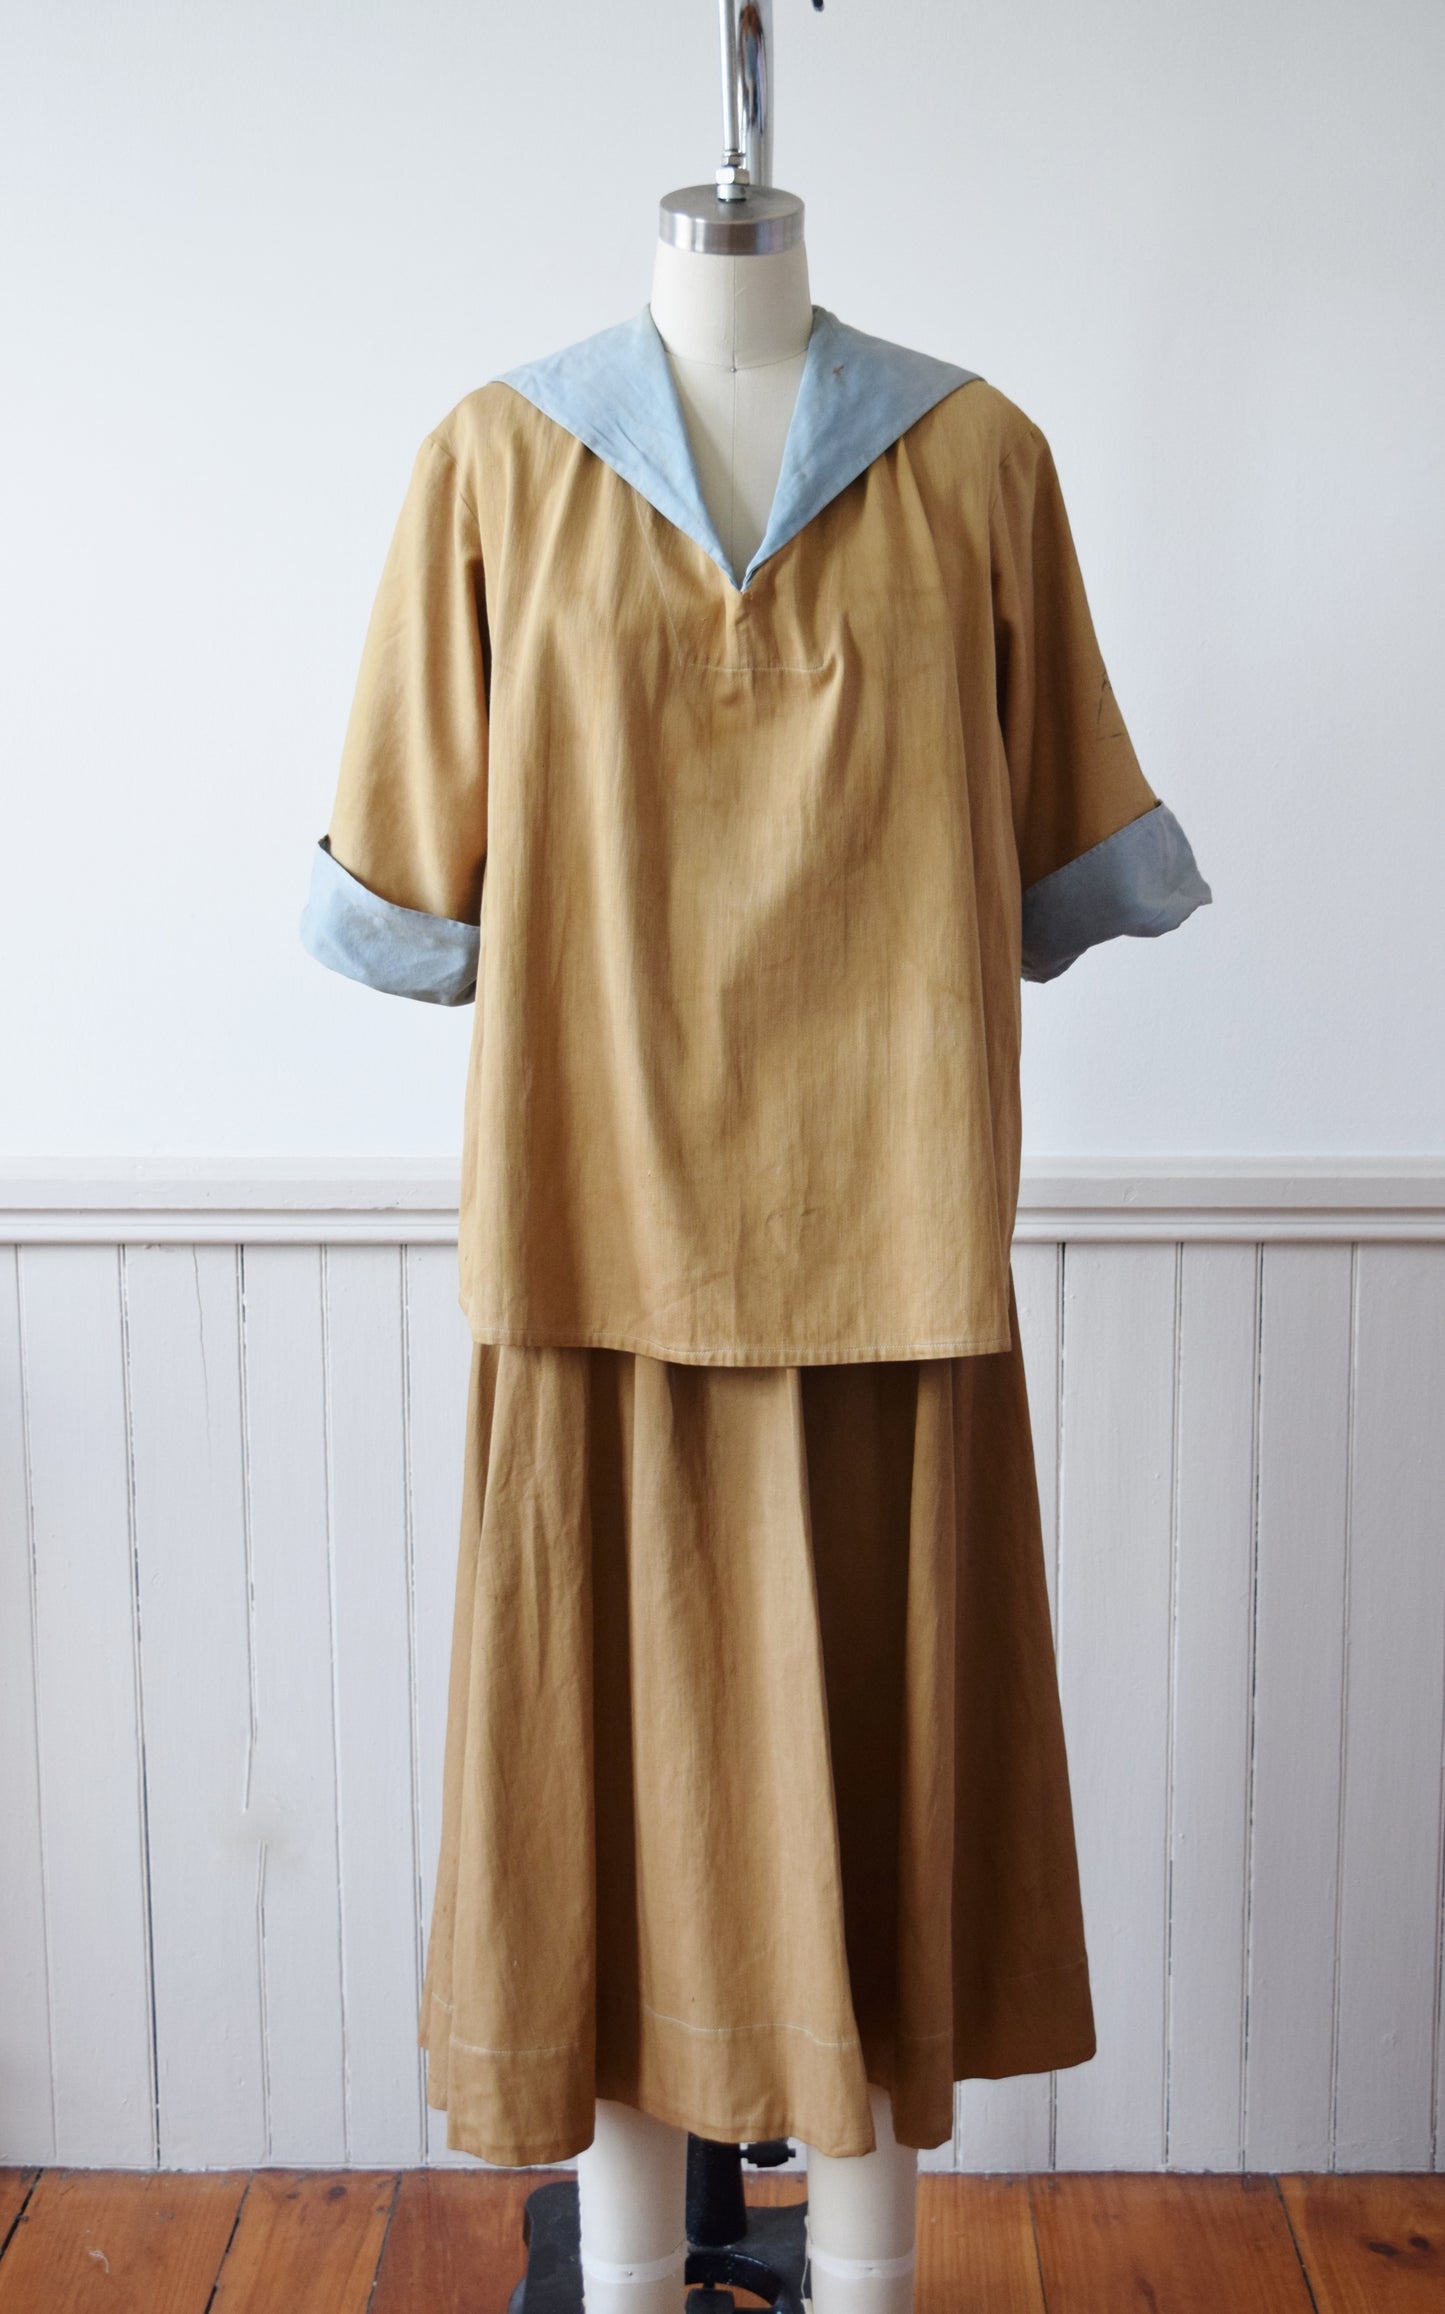 Early 1910s-1920s Camp Fire or Girl Scout Uniform